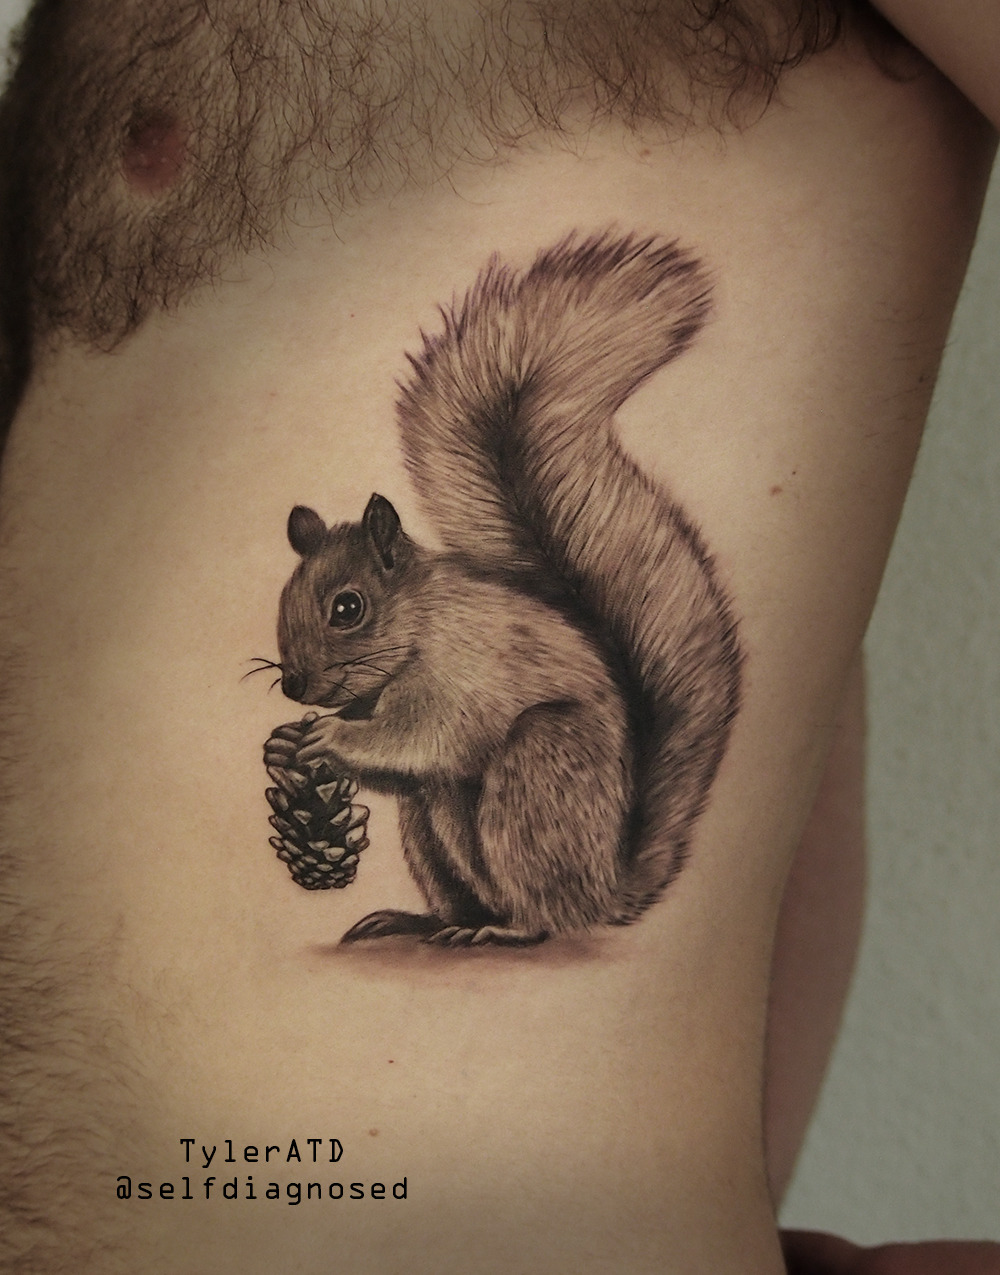 We just love this squirrel tattoo by Nate Des Jardins @natejardinstattoo  #fallcolors #squirrelsofinstagram #squirrel #acorn #falltattoo  #fallvibes... | By LuckymonkeytattooFacebook